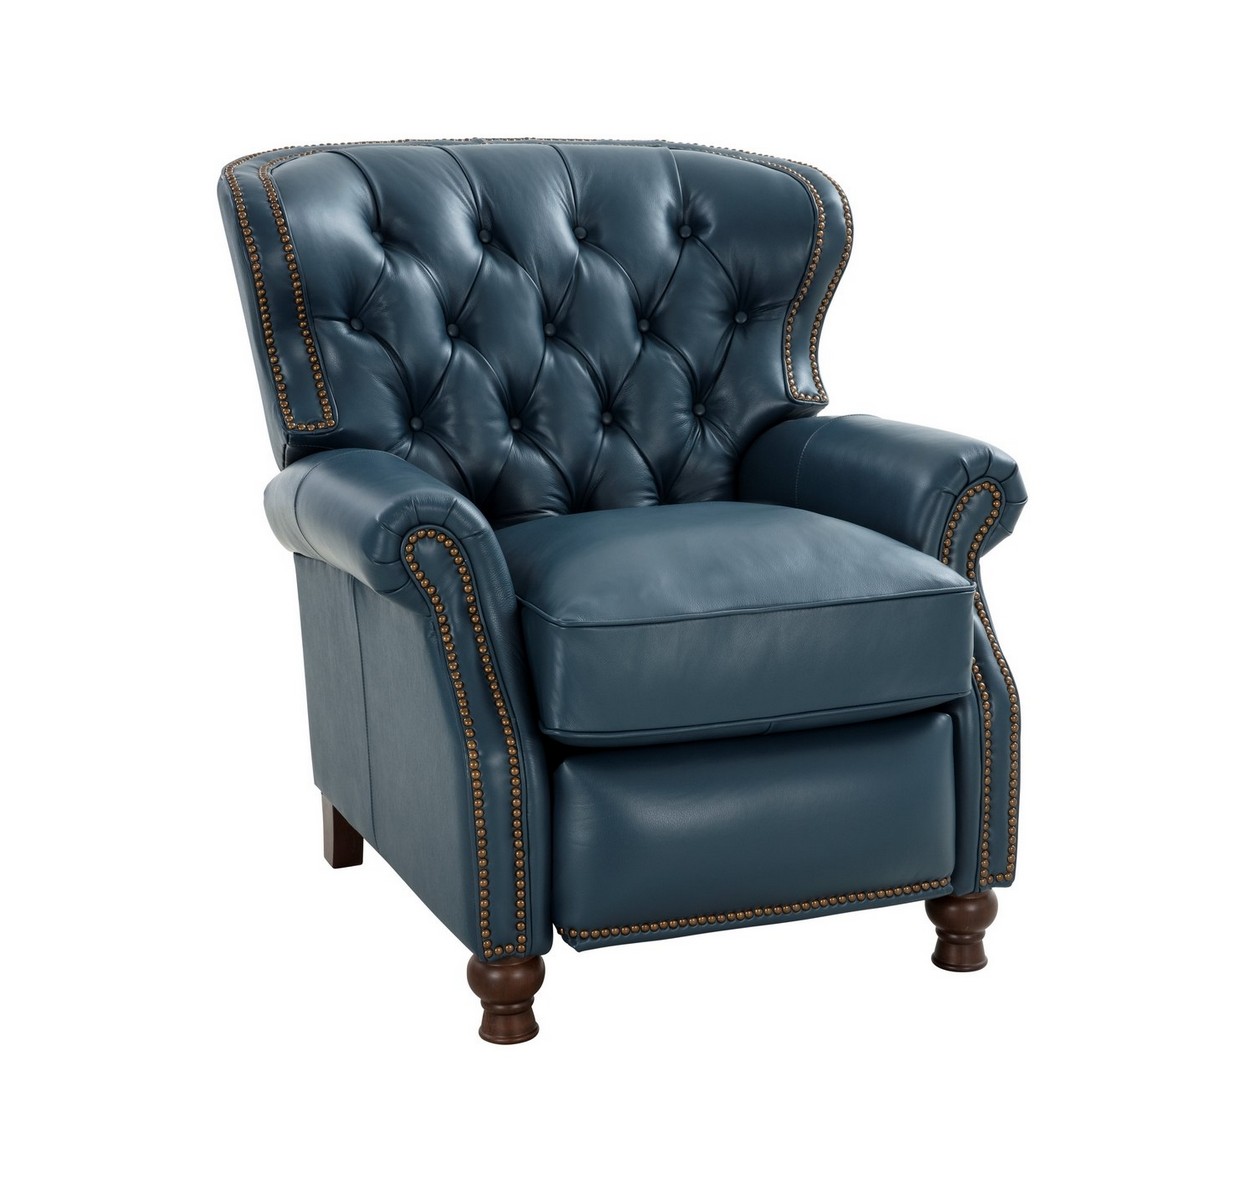 Barcalounger Presidential Recliner Chair - Prestin Yale Blue/All Leather